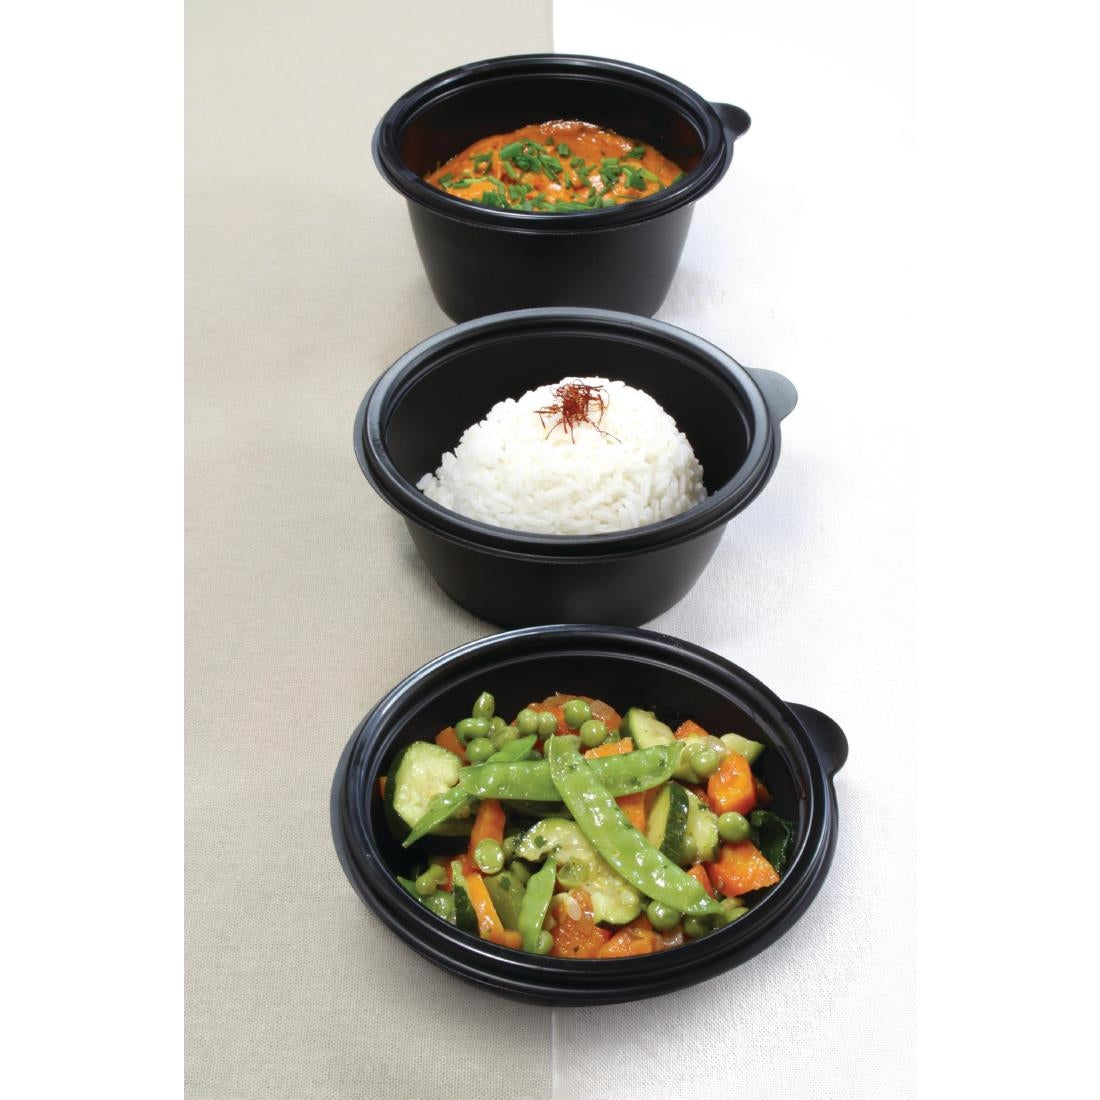 Fastpac Medium Round Food Containers 750ml / 26oz (Pack of 300) JD Catering Equipment Solutions Ltd